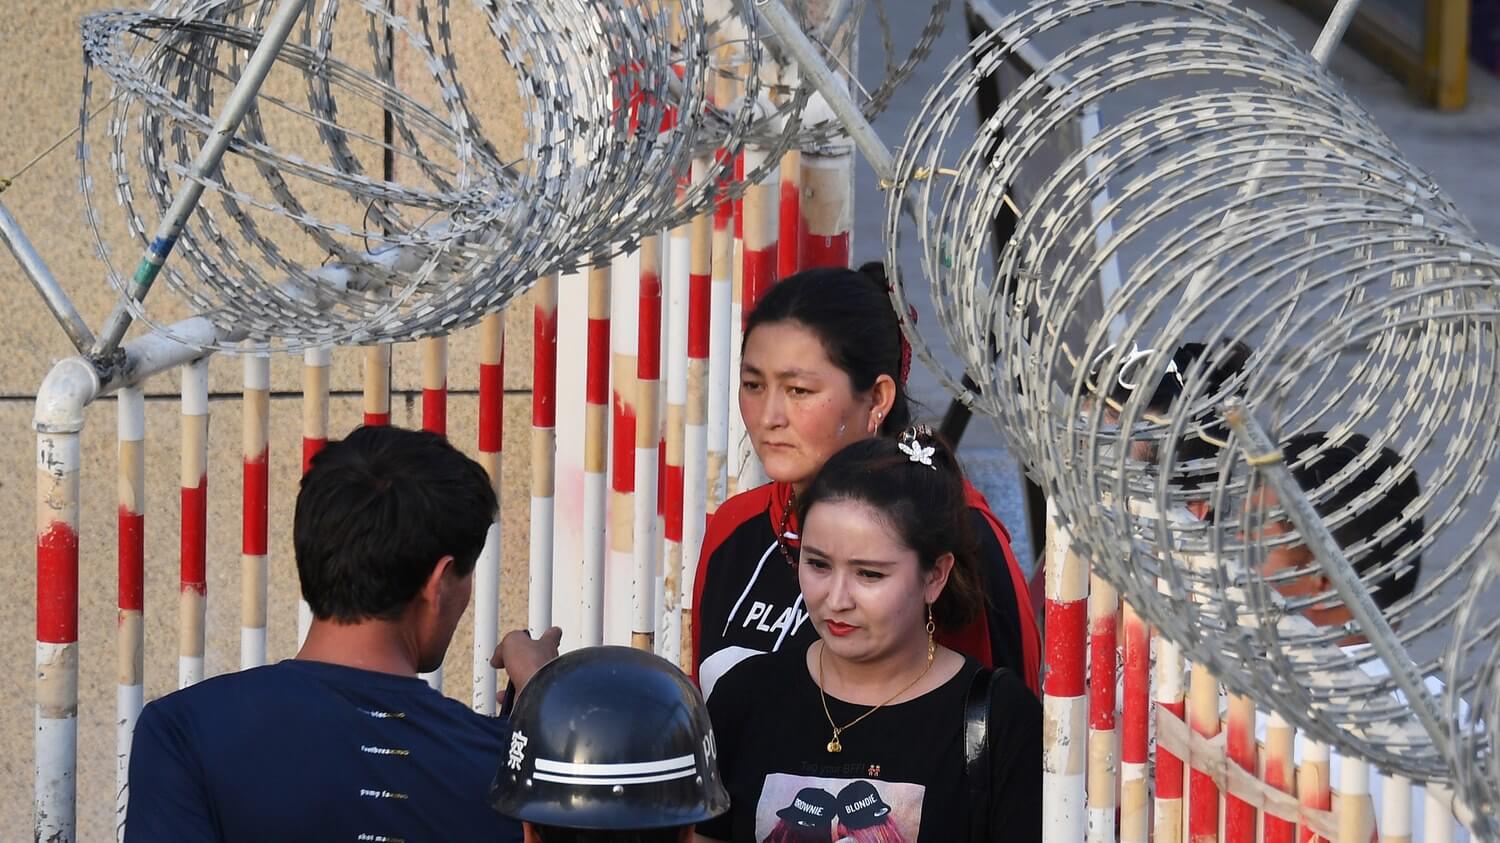 UN Requests OHCHR to Visit Xinjiang Detention Camps Following Reports of Systemic Rape